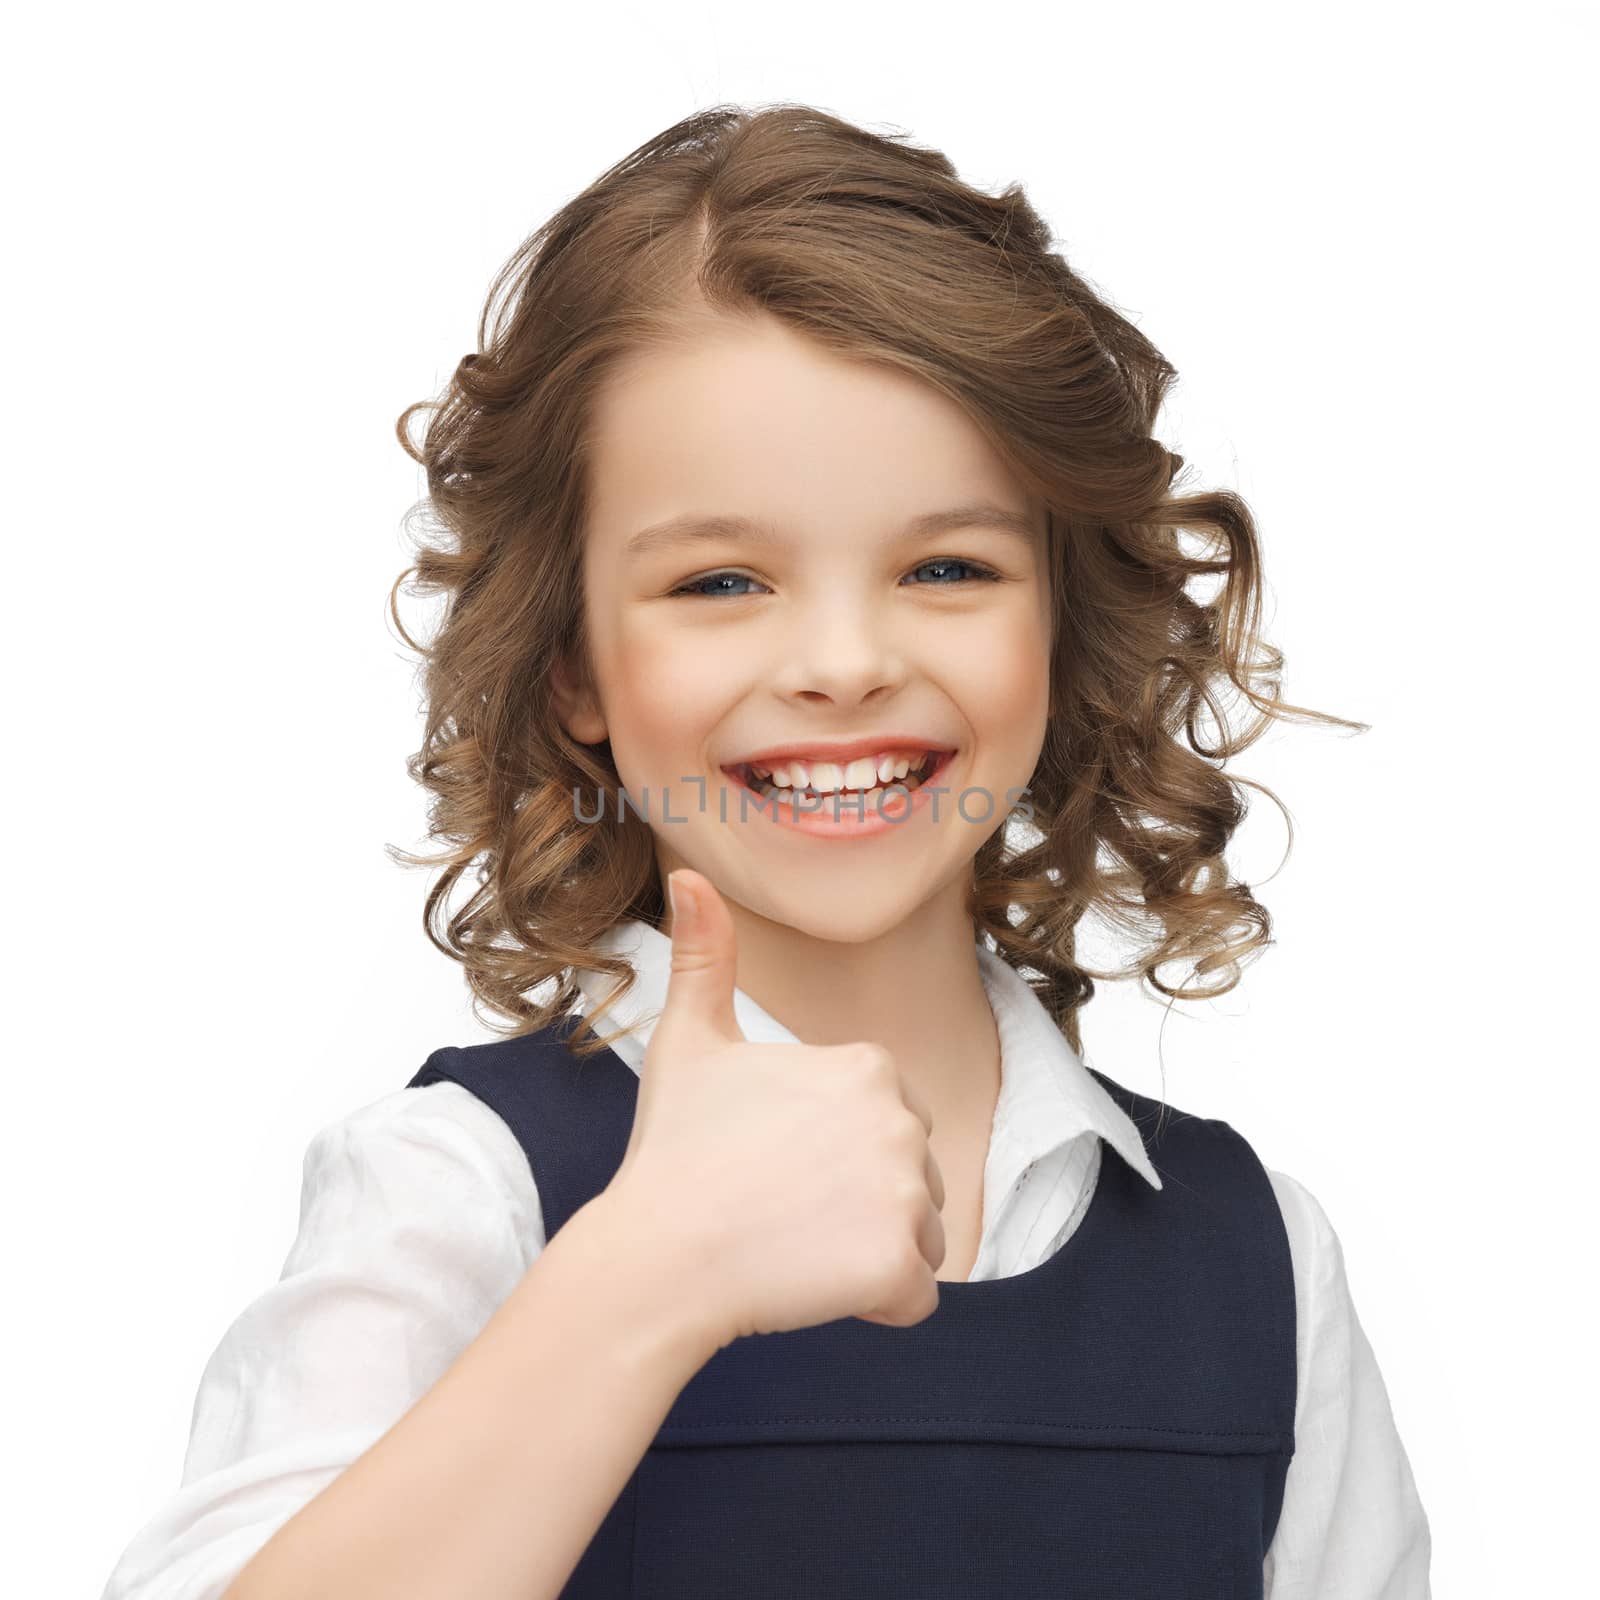 pre-teen girl showing thumbs up by dolgachov